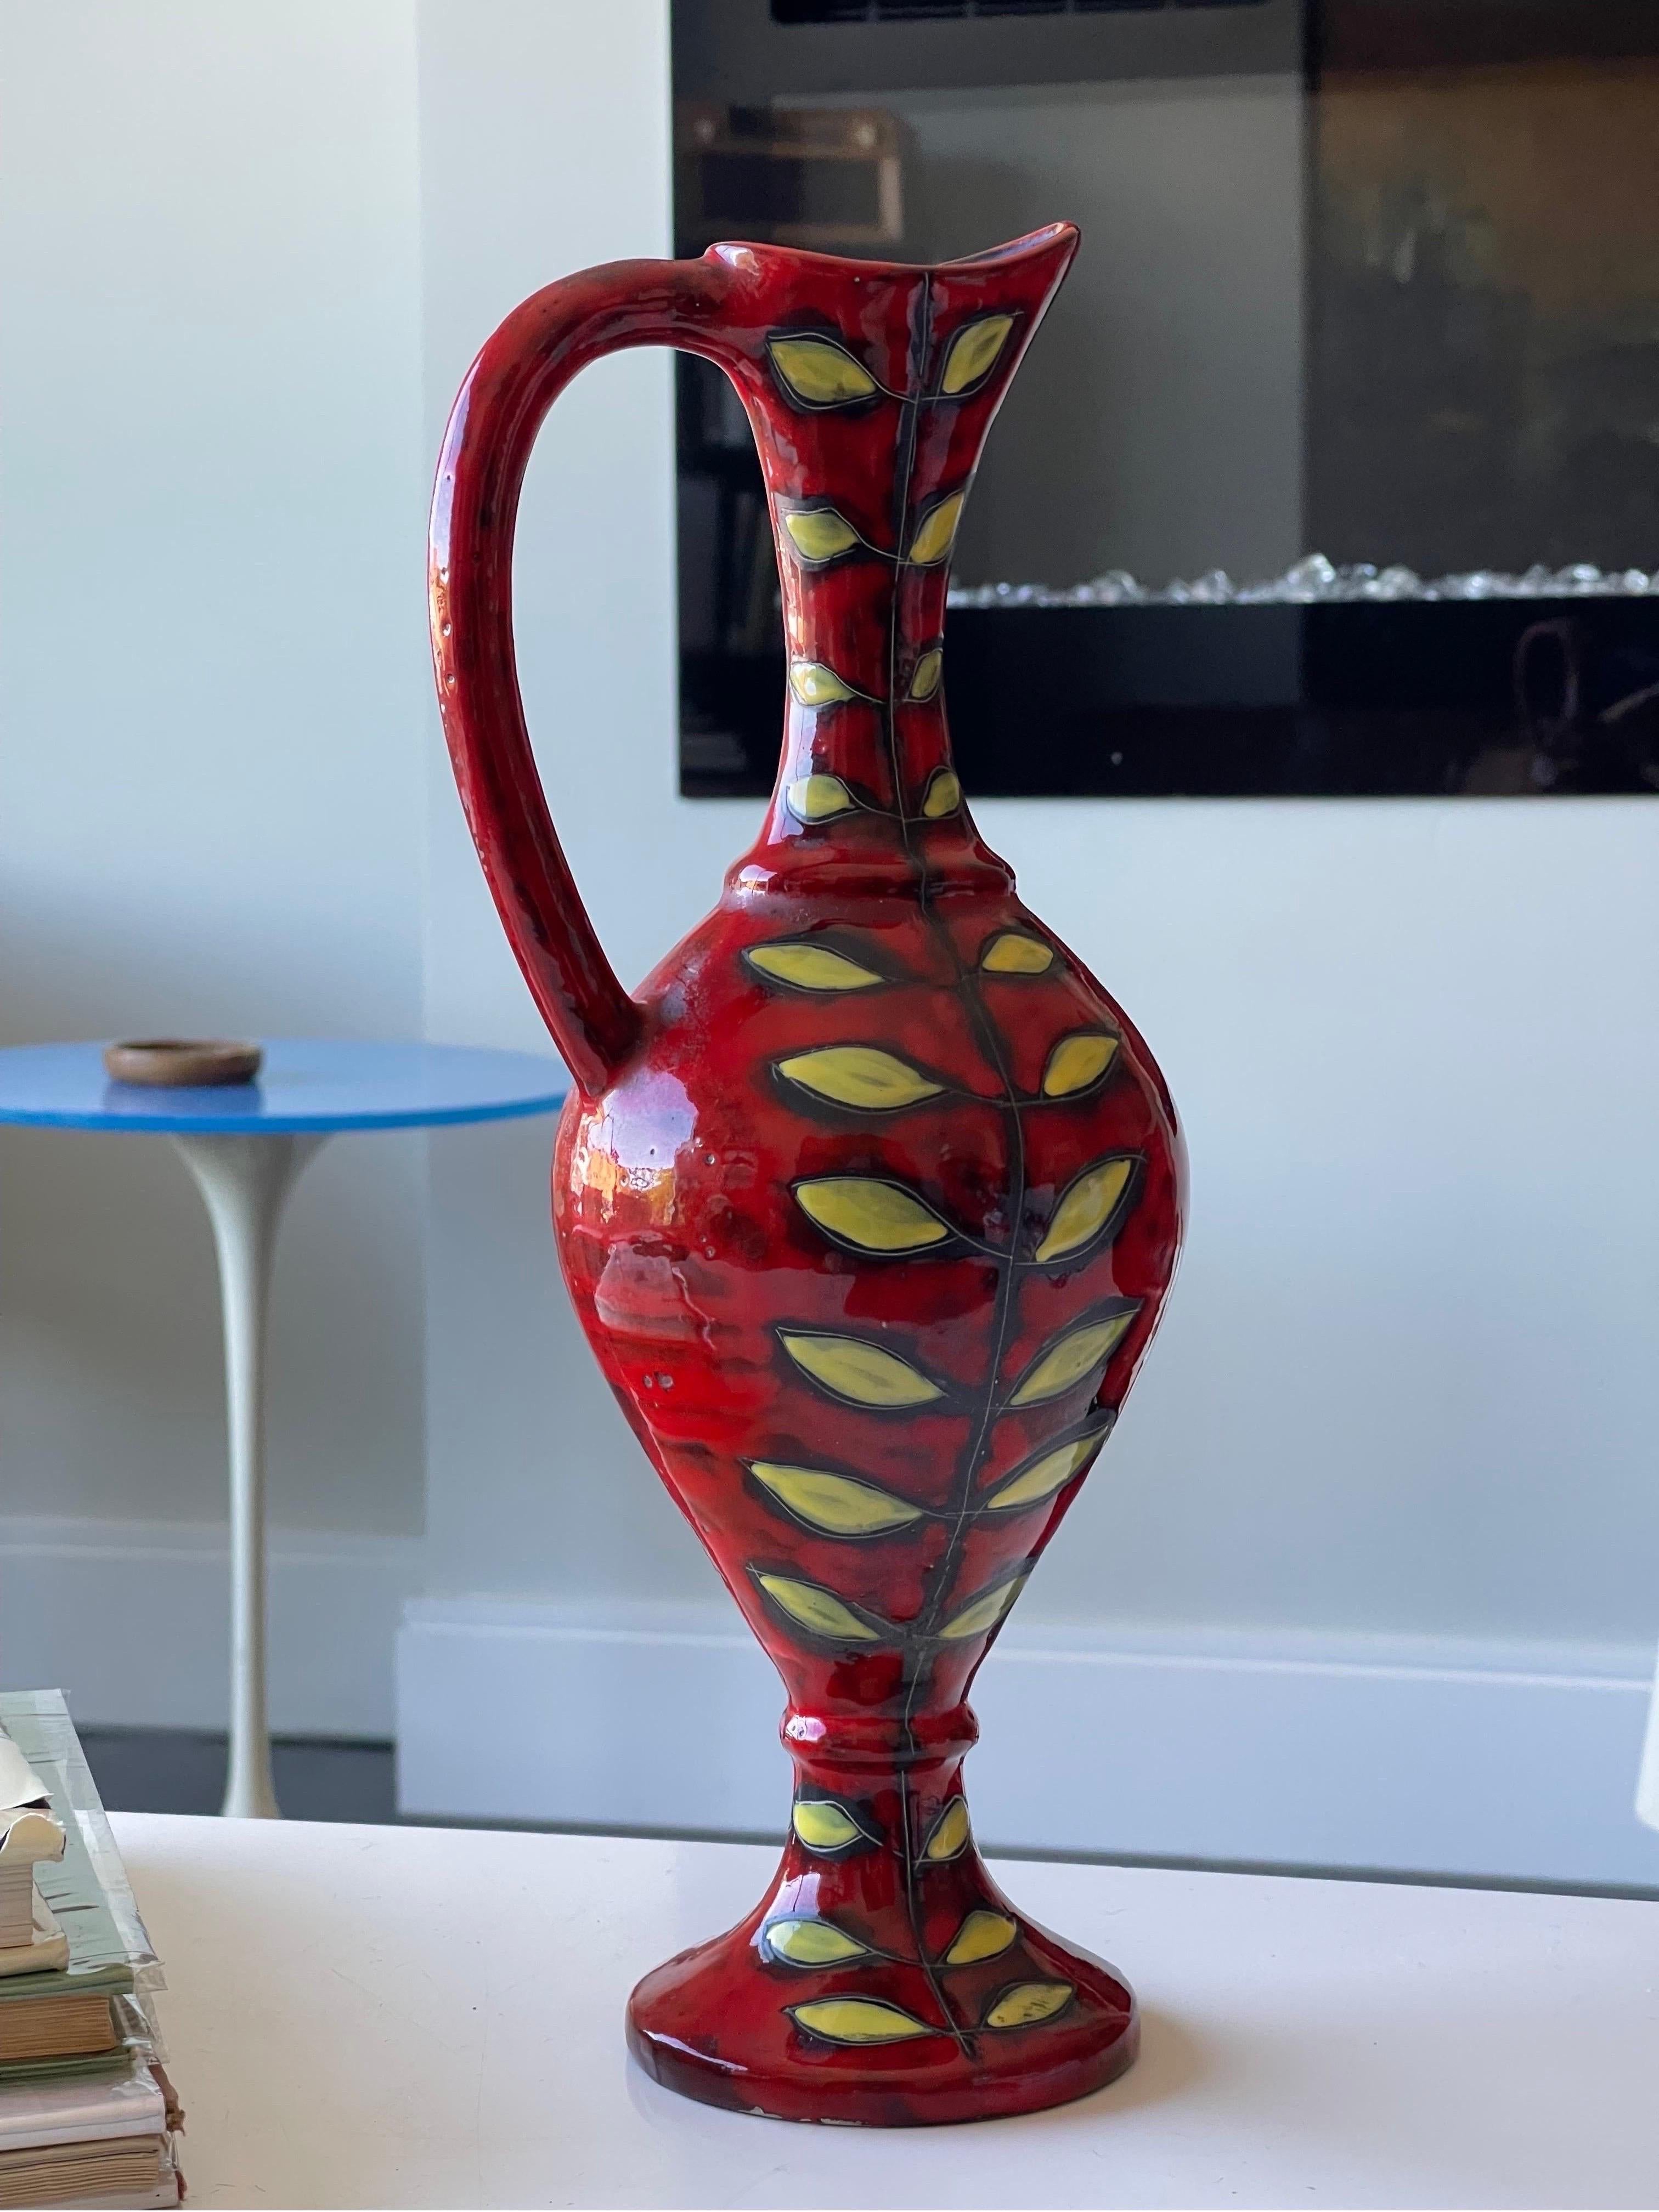 Exquisite Italian Ceramic Vase or Pitcher by Fantoni for Raymor For Sale 6